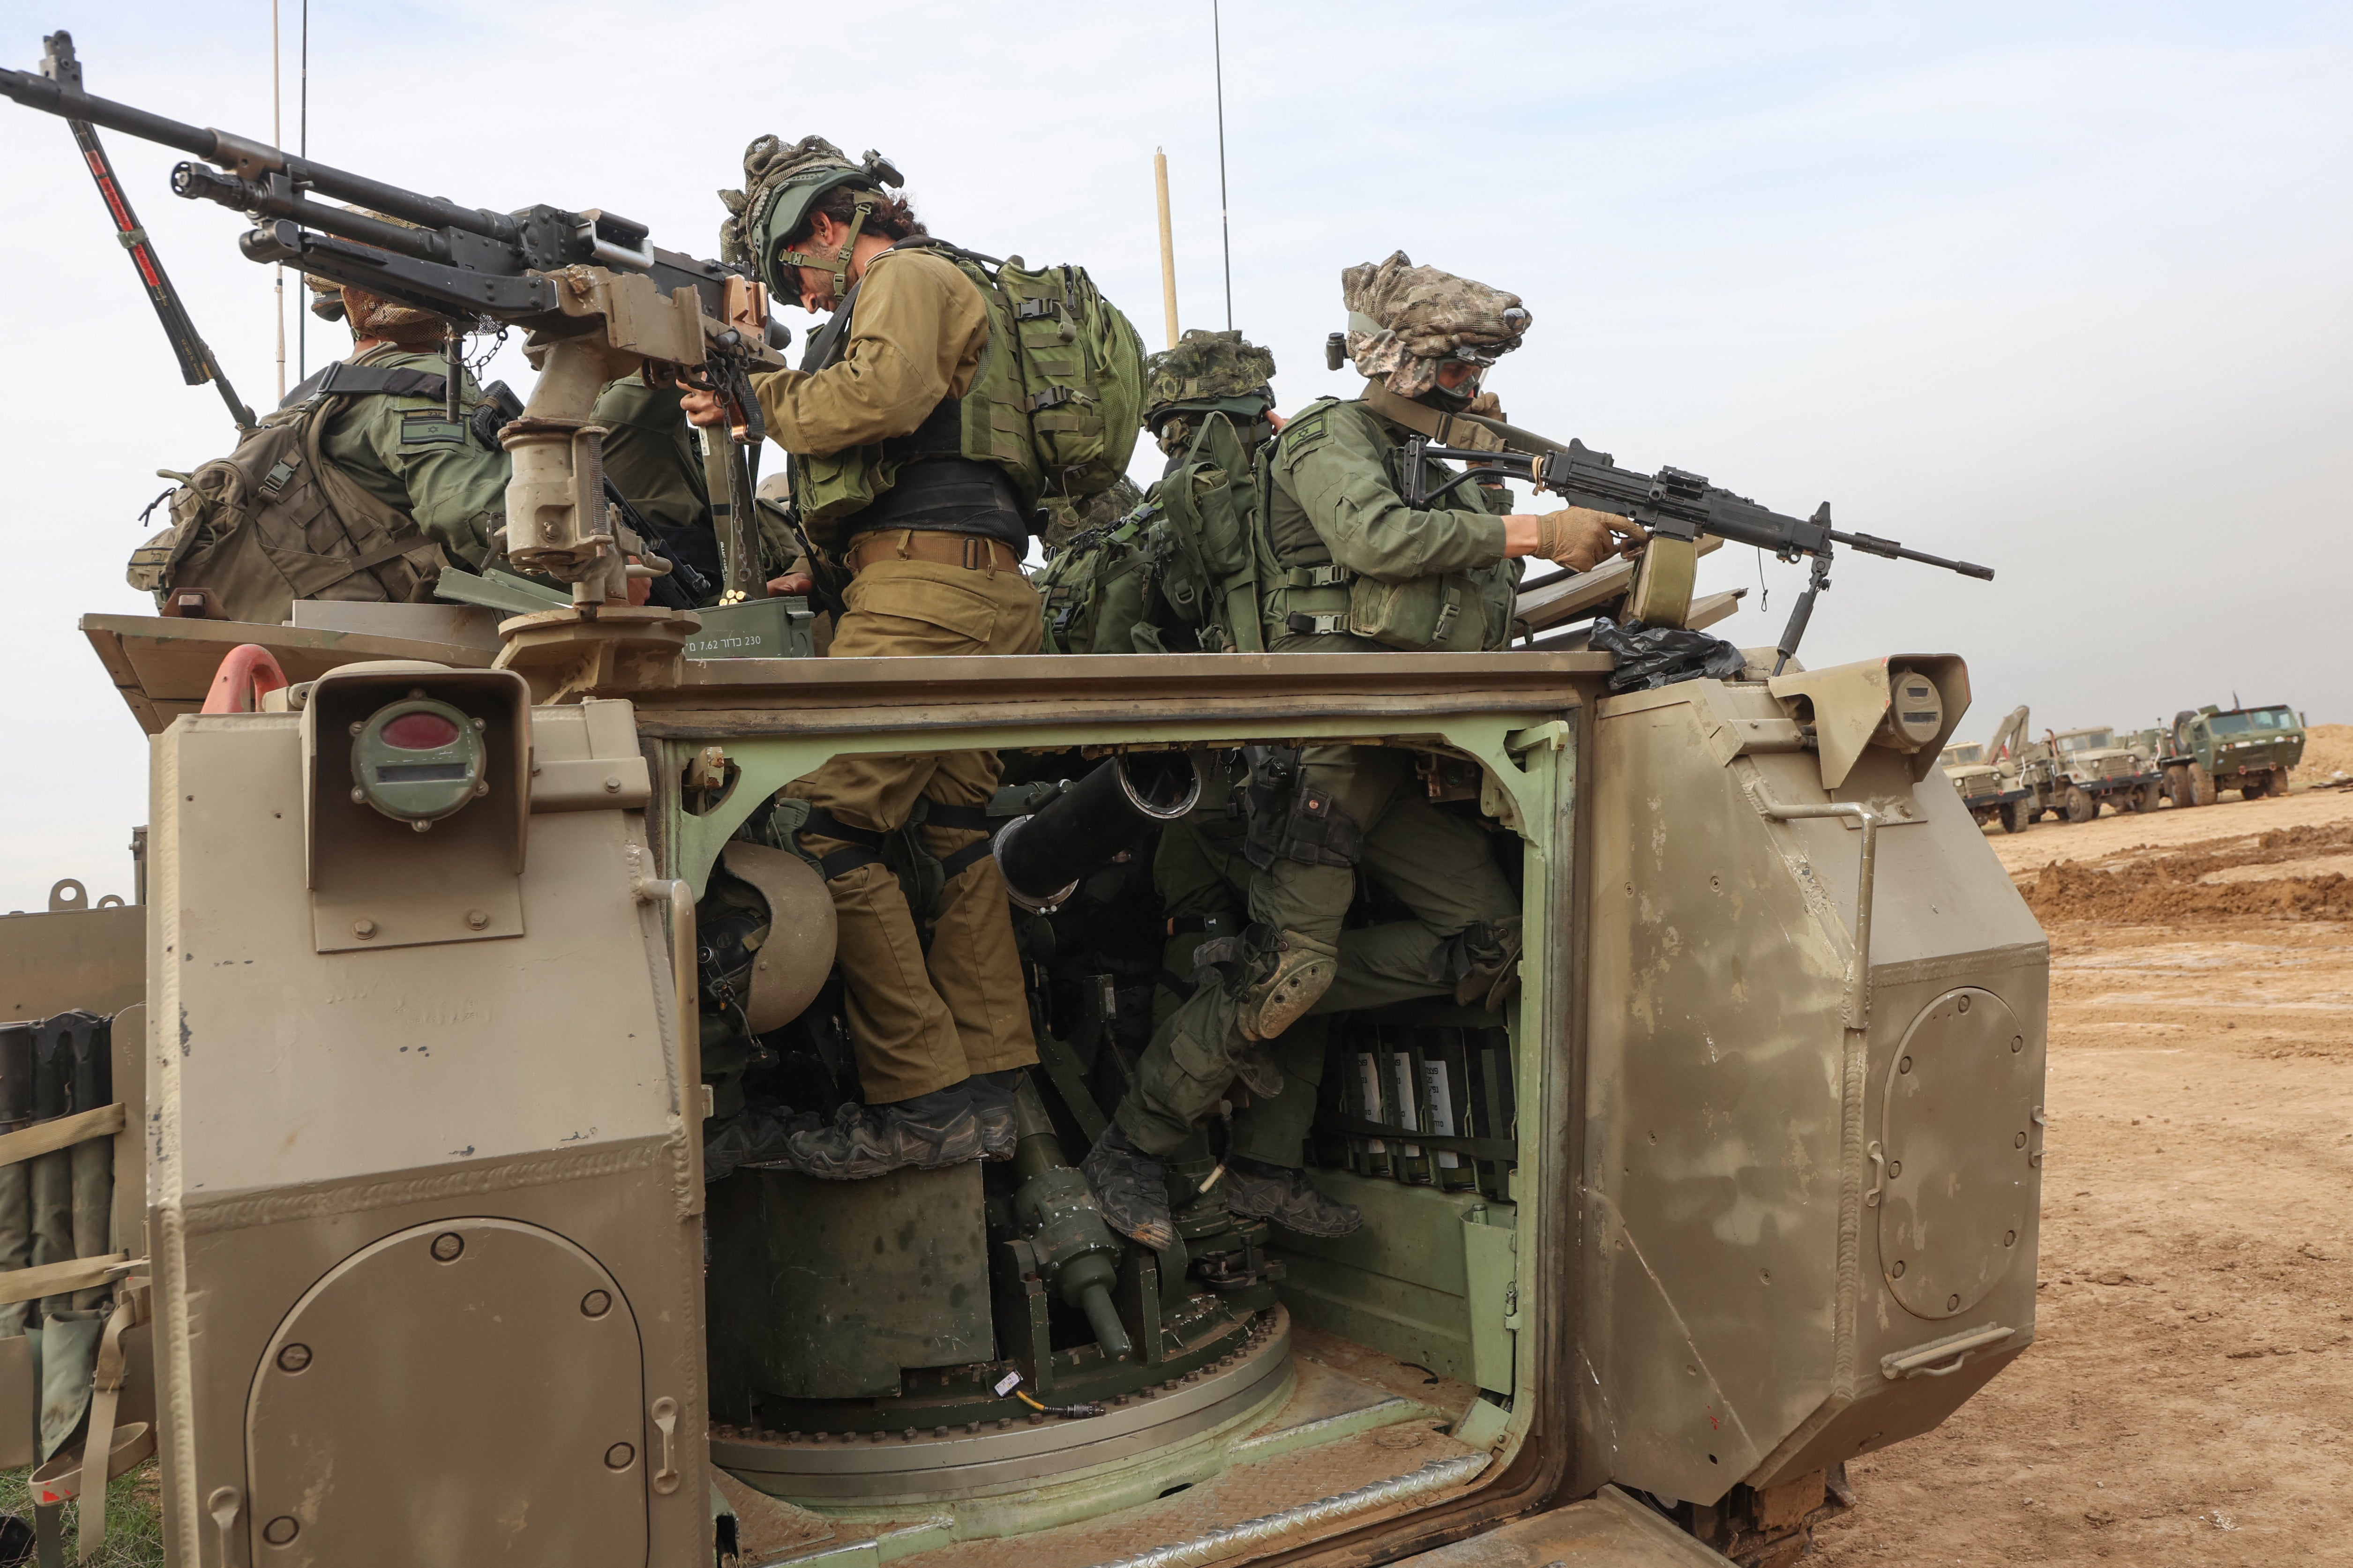 Israeli troops prepare weapons by the border fence before entering the Gaza Strip on Sunday